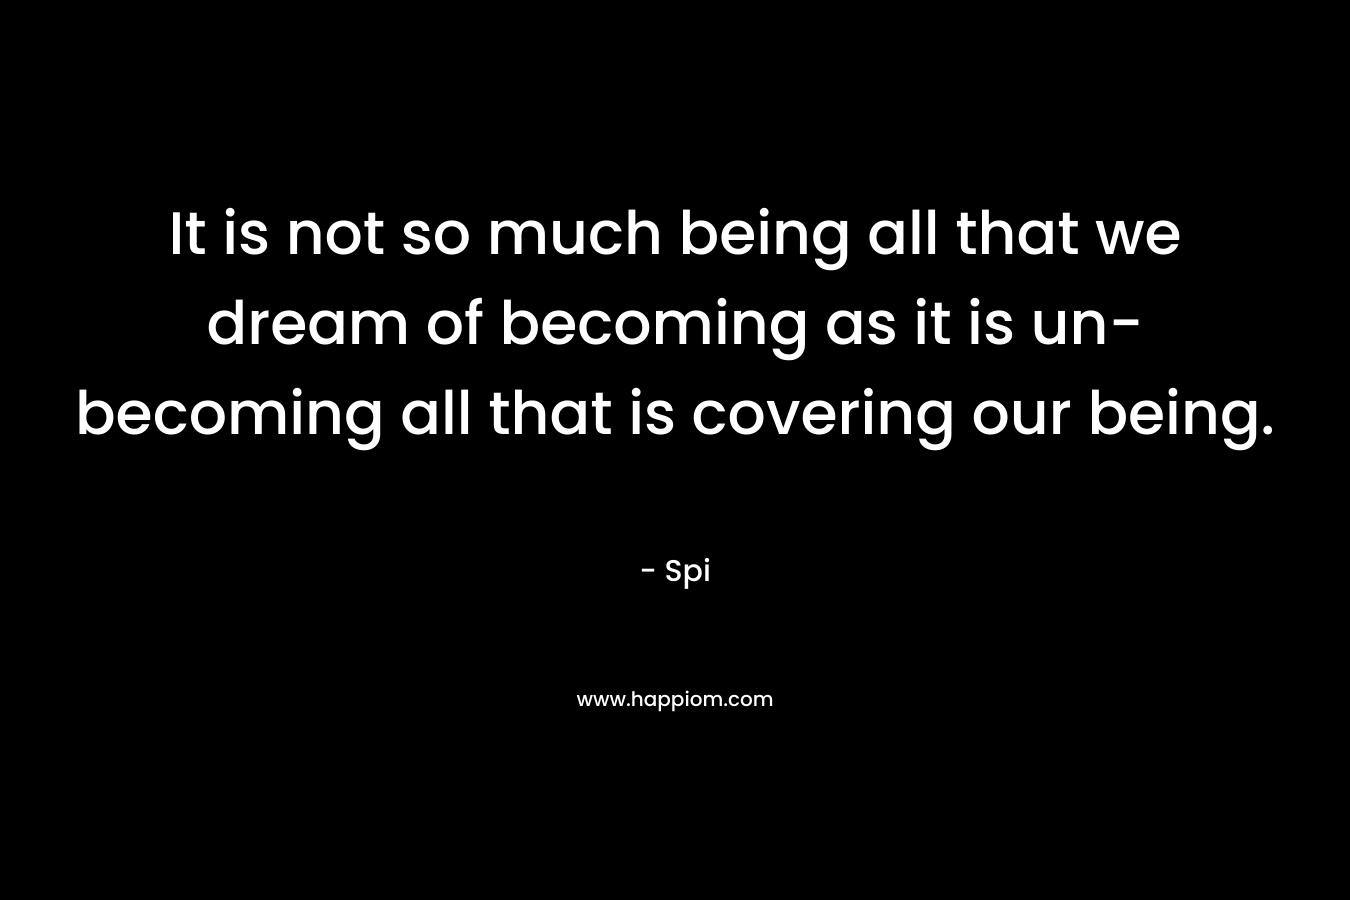 It is not so much being all that we dream of becoming as it is un-becoming all that is covering our being. – Spi